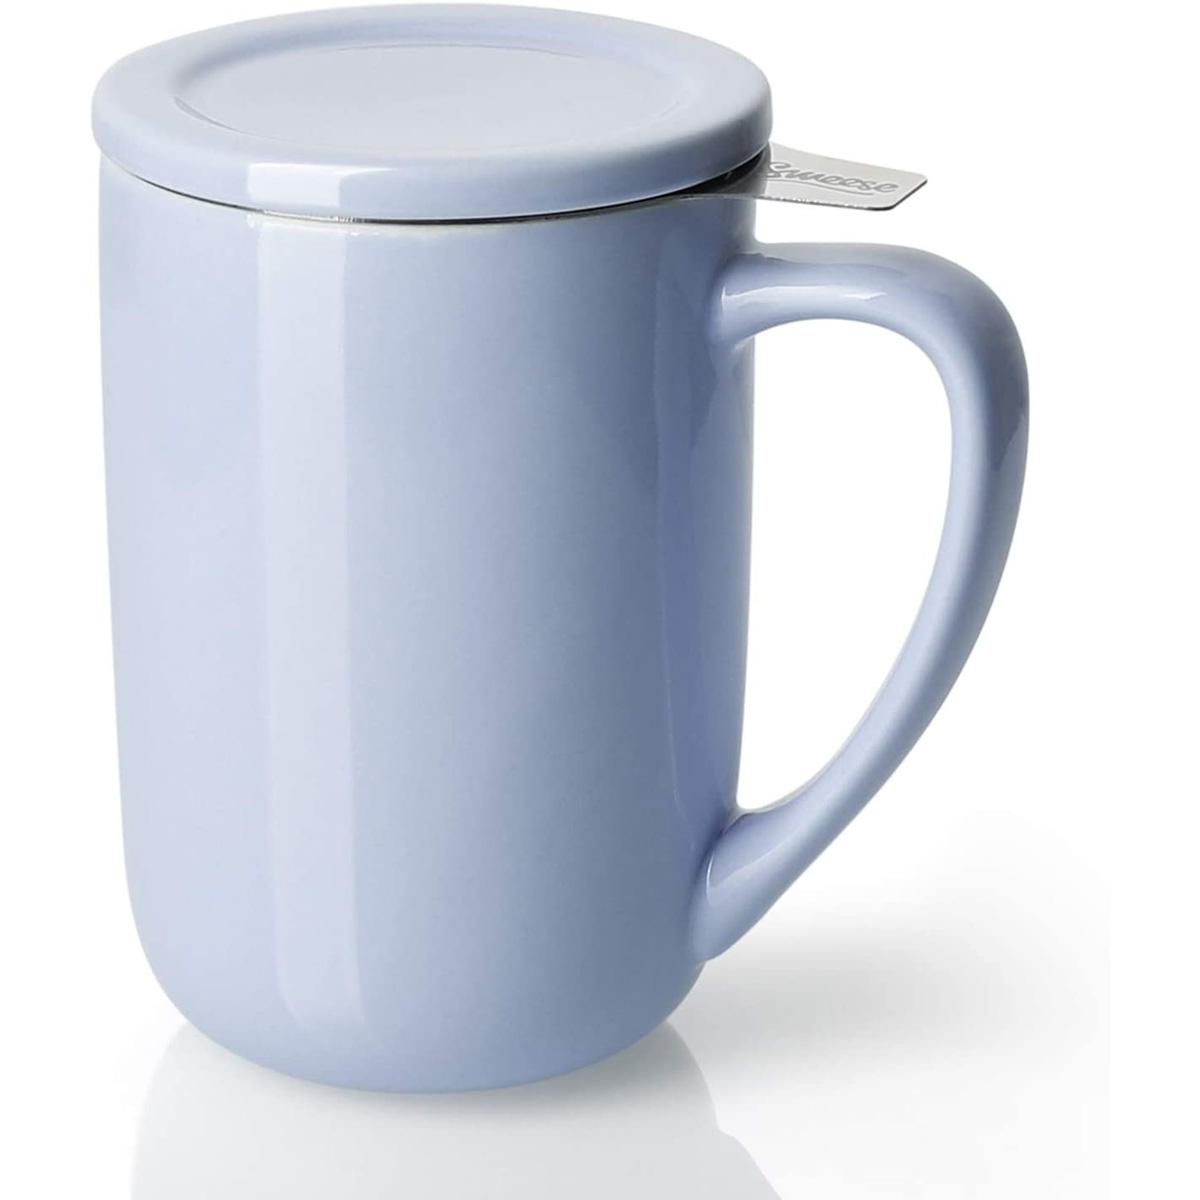  Sweese Porcelain Tea Mugs with Infuser and Lid for $8.99